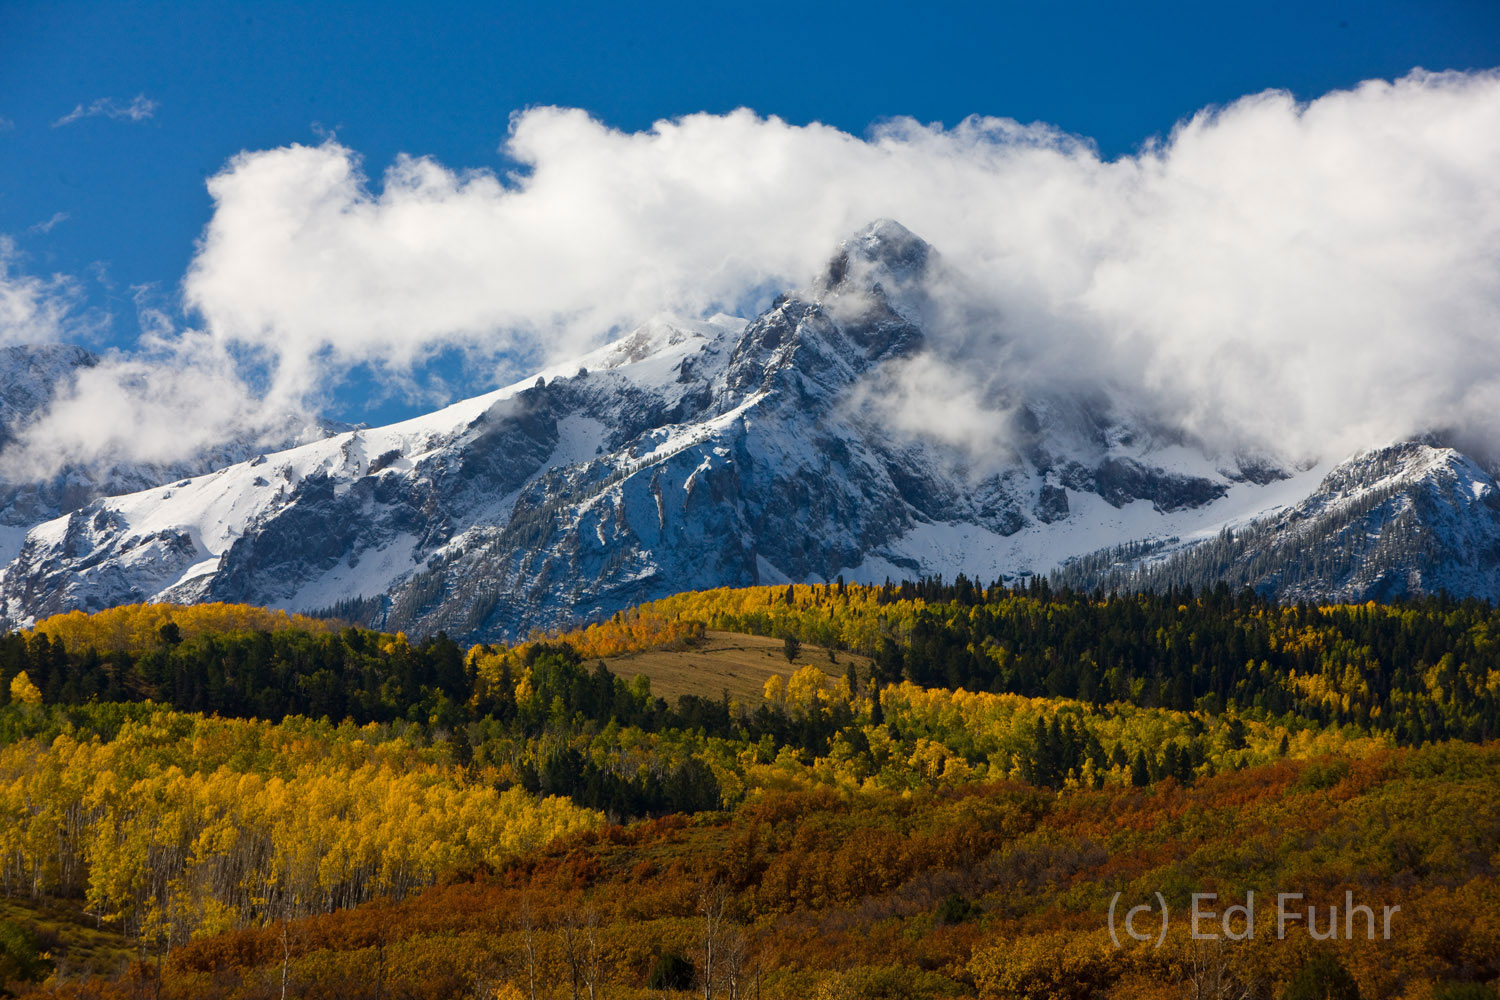 An early September snow blankets the high peaks of the San Juans even as the aspens below reach peak.   